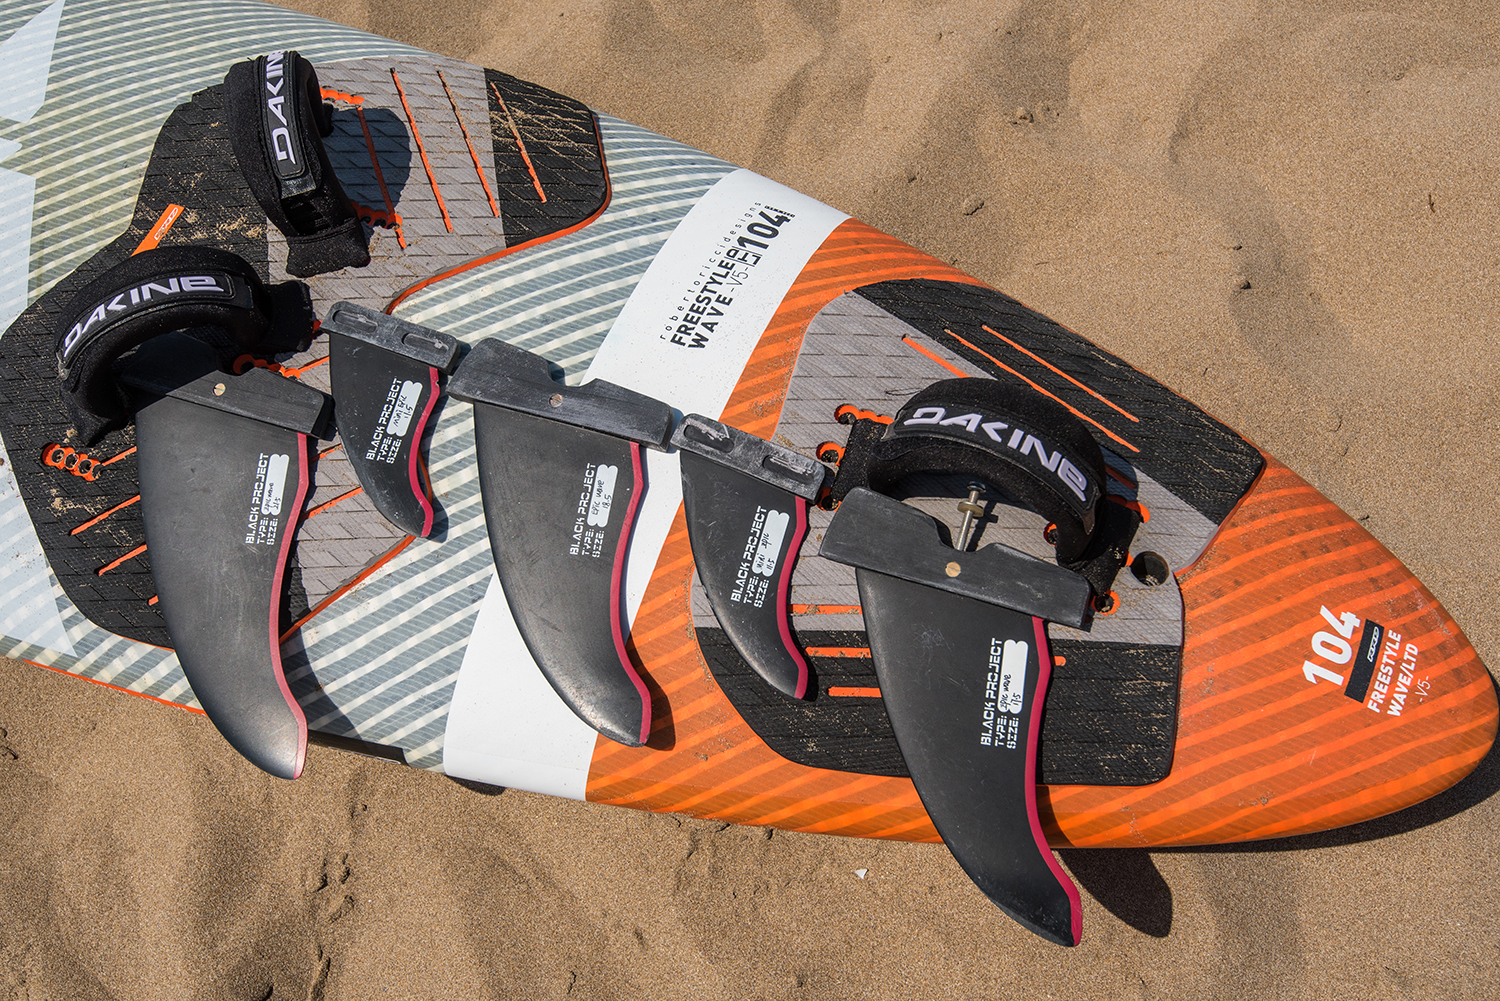 Small single fin, and then a thruster set with 2 rear fin options gives you lots of range on a tri fin FSW.